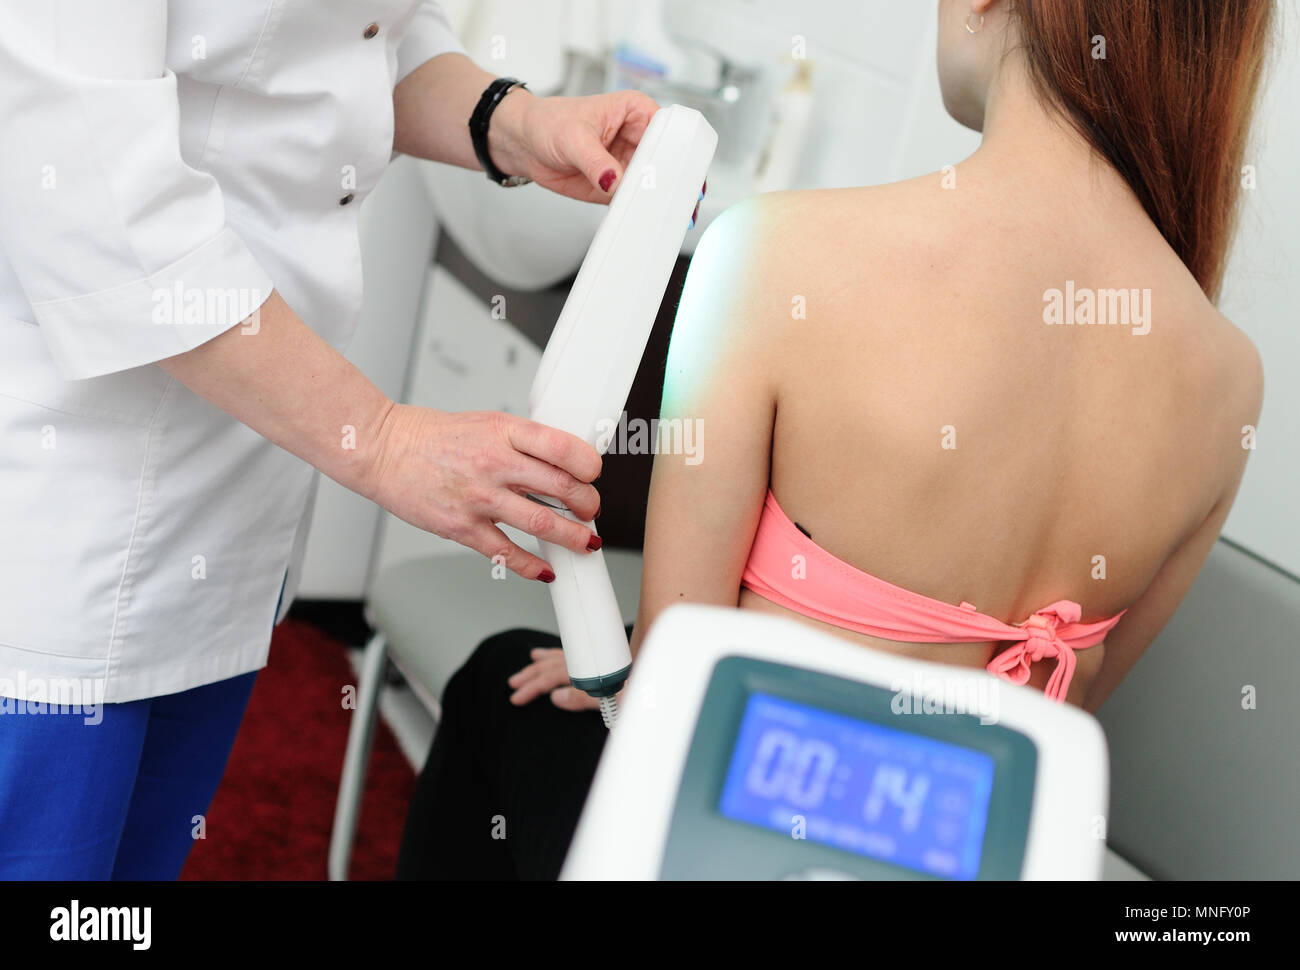 young girl is undergoing treatment of skin diseases Stock Photo